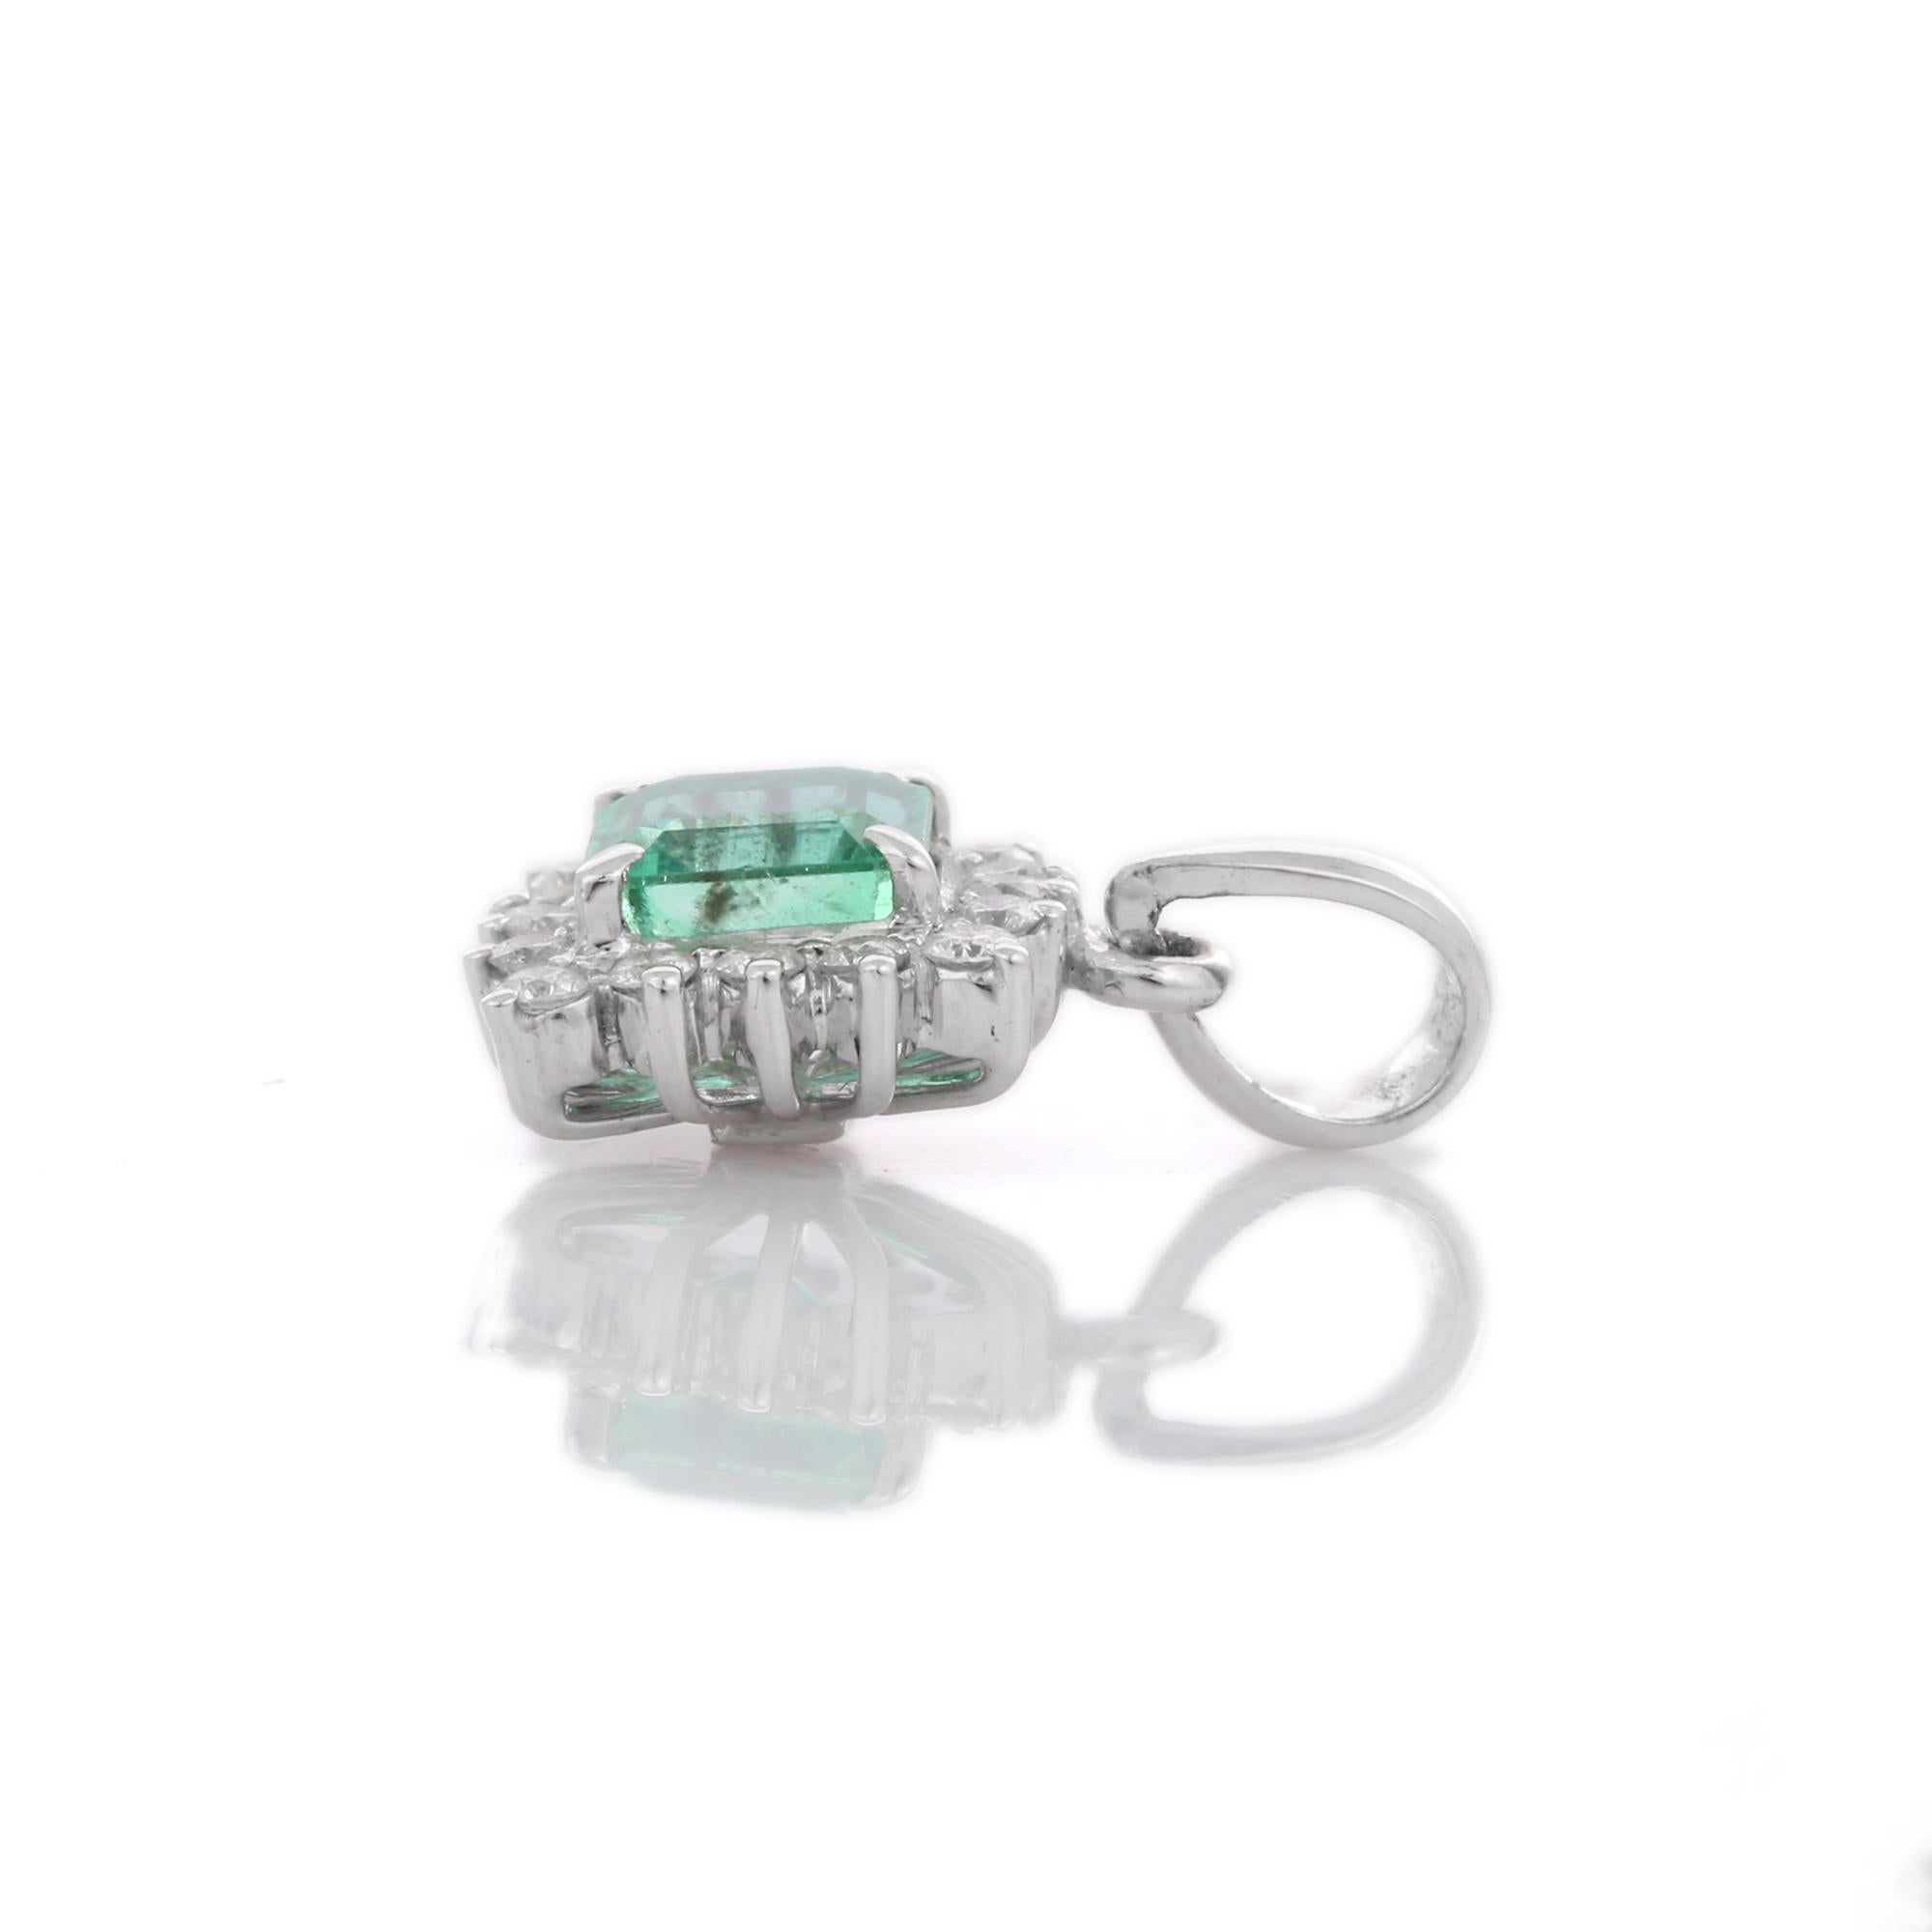 Emerald pendant in 18K Gold. It has a cushion cut emerald studded with diamonds that completes your look with a decent touch. Pendants are used to wear or gifted to represent love and promises. It's an attractive jewelry piece that goes with every